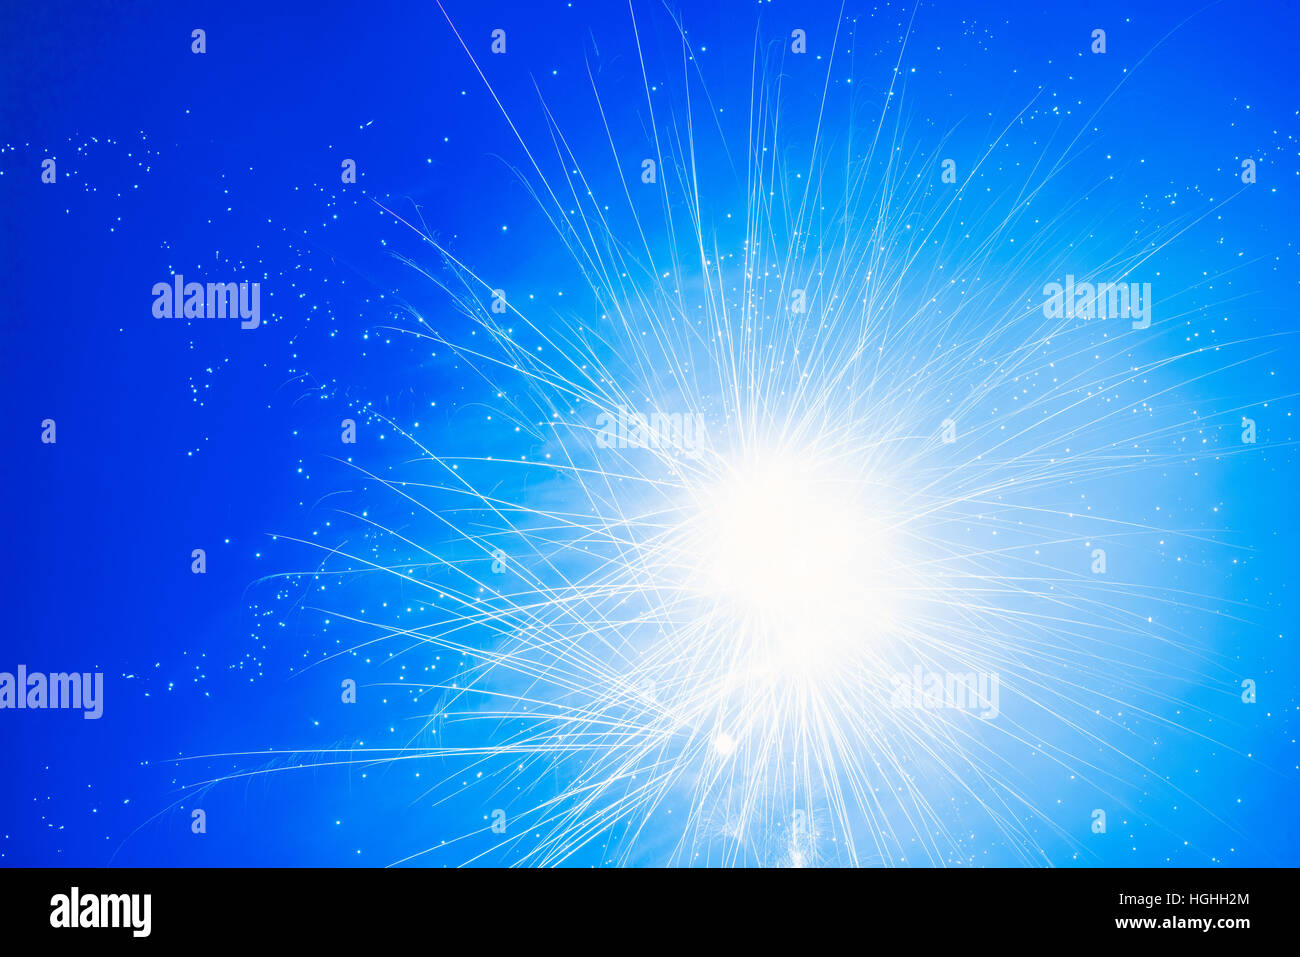 Fireworks explosion on the blue sky Stock Photo